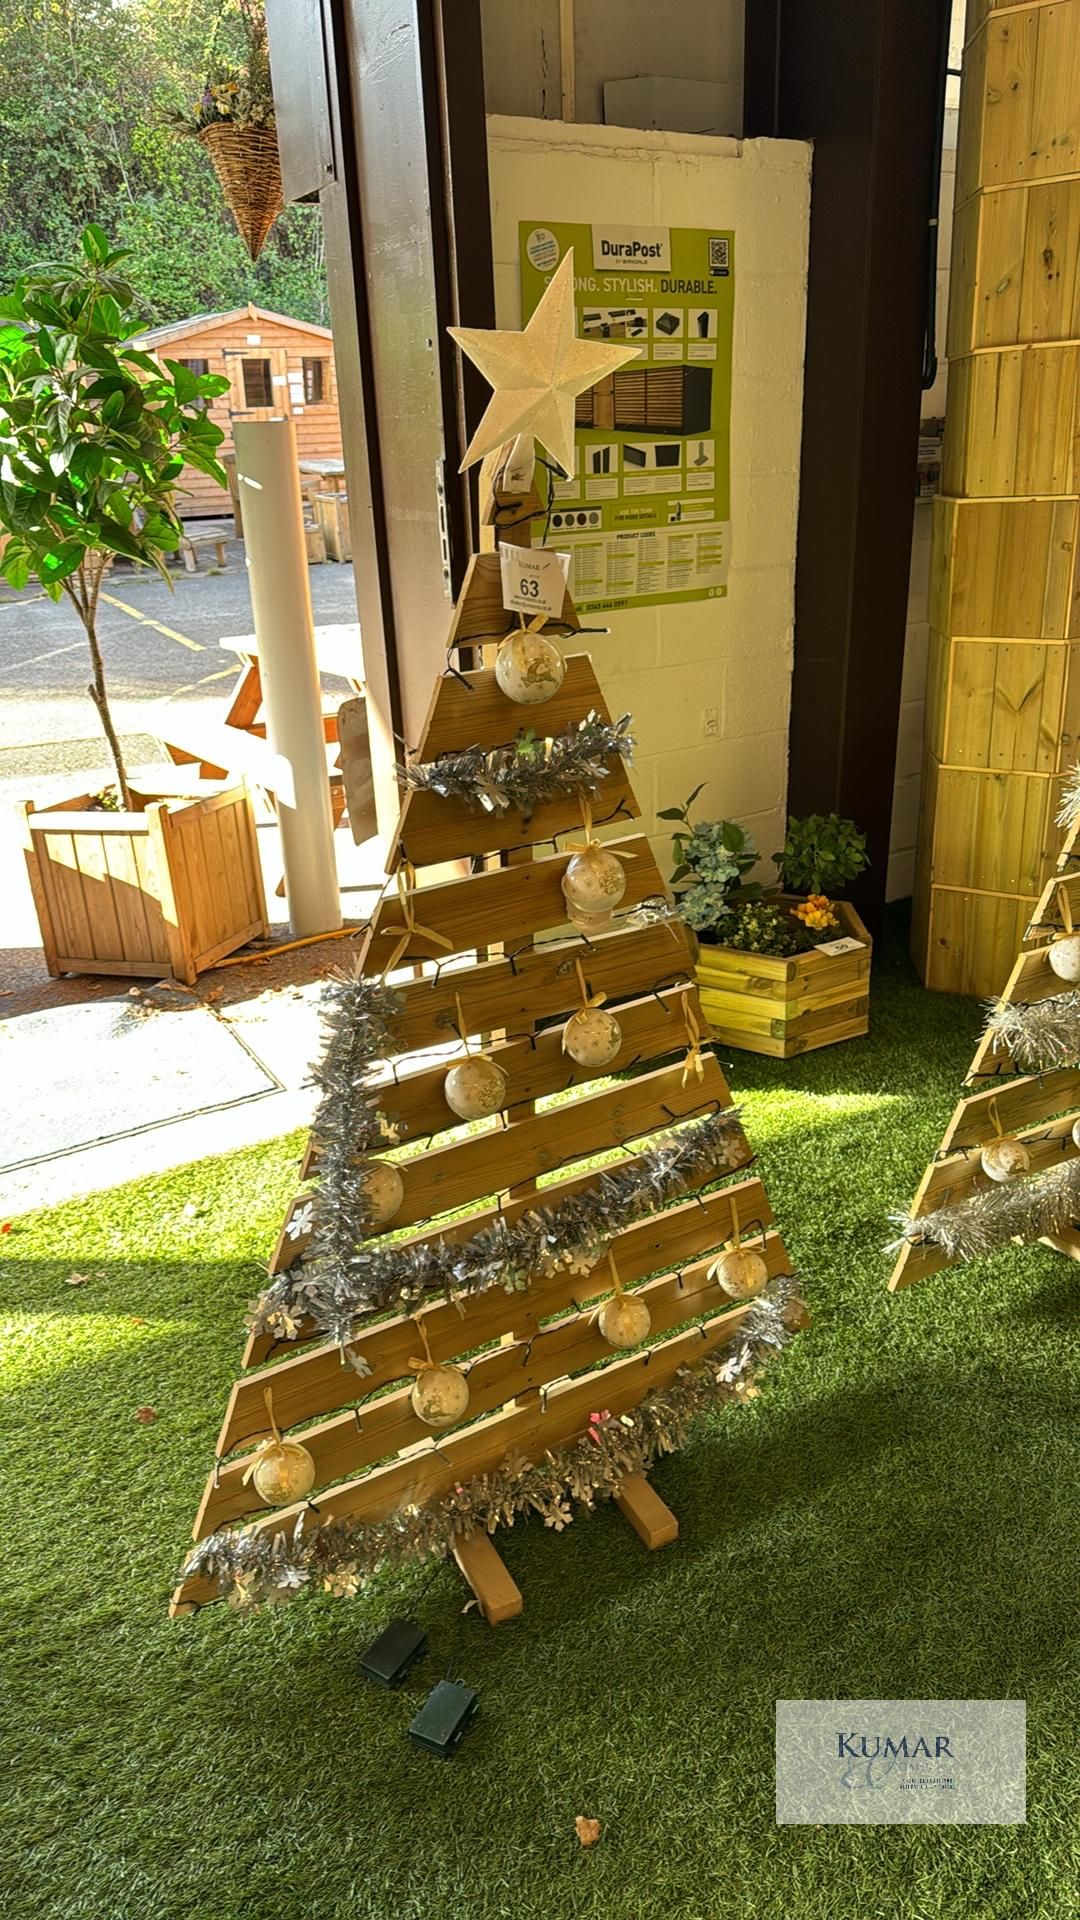 Wooden Xmas Tree with Decorations - Image 2 of 3